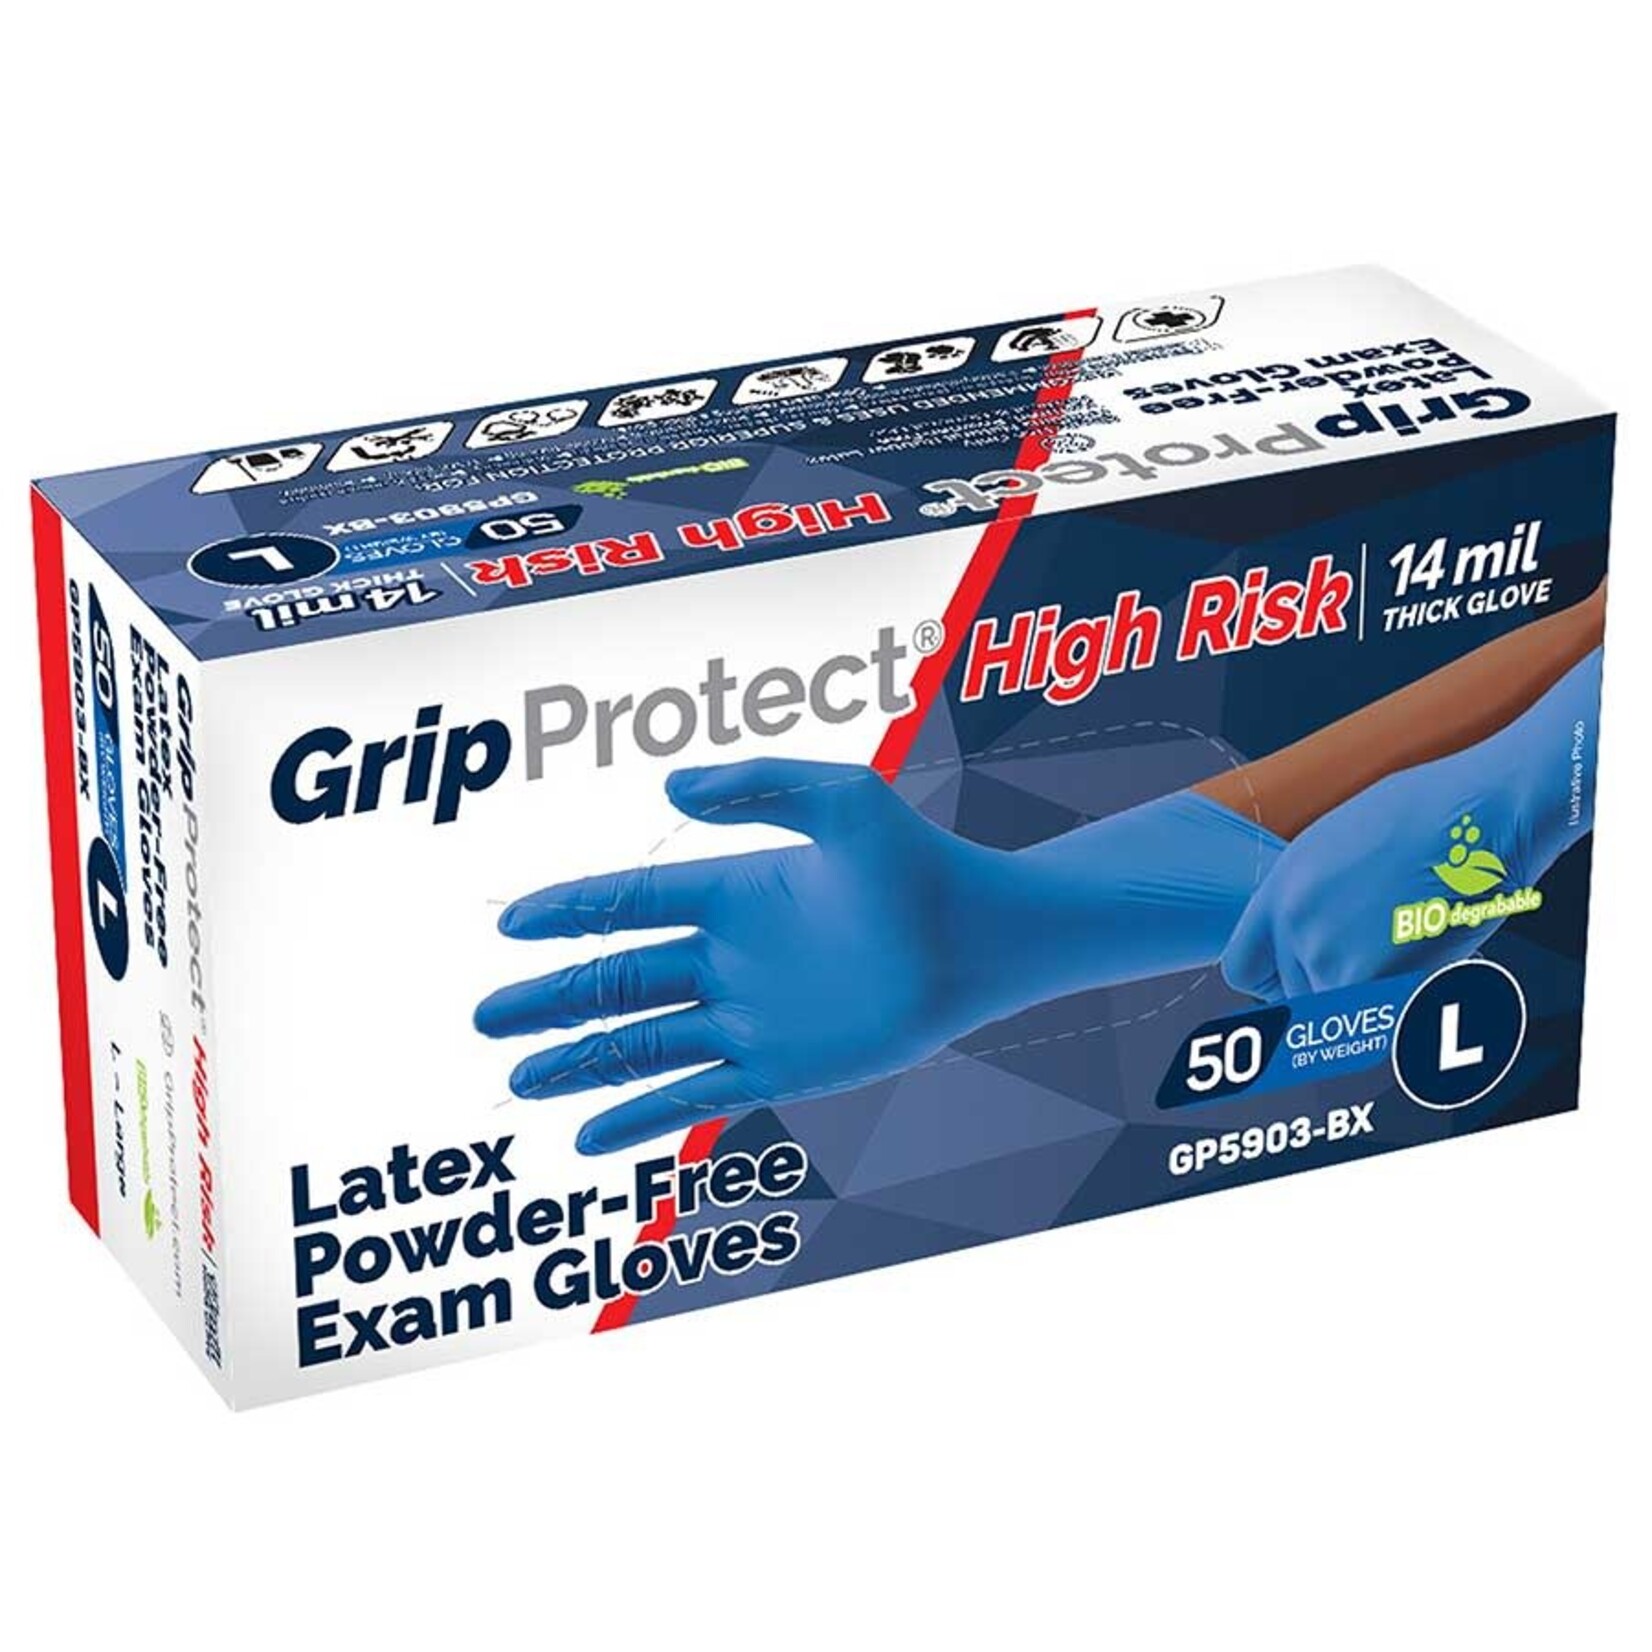 BMC Protect GripProtect High Risk 14 Mil Latex Powder-Free Exam Gloves, Blue, L (Case of 10 Boxes)